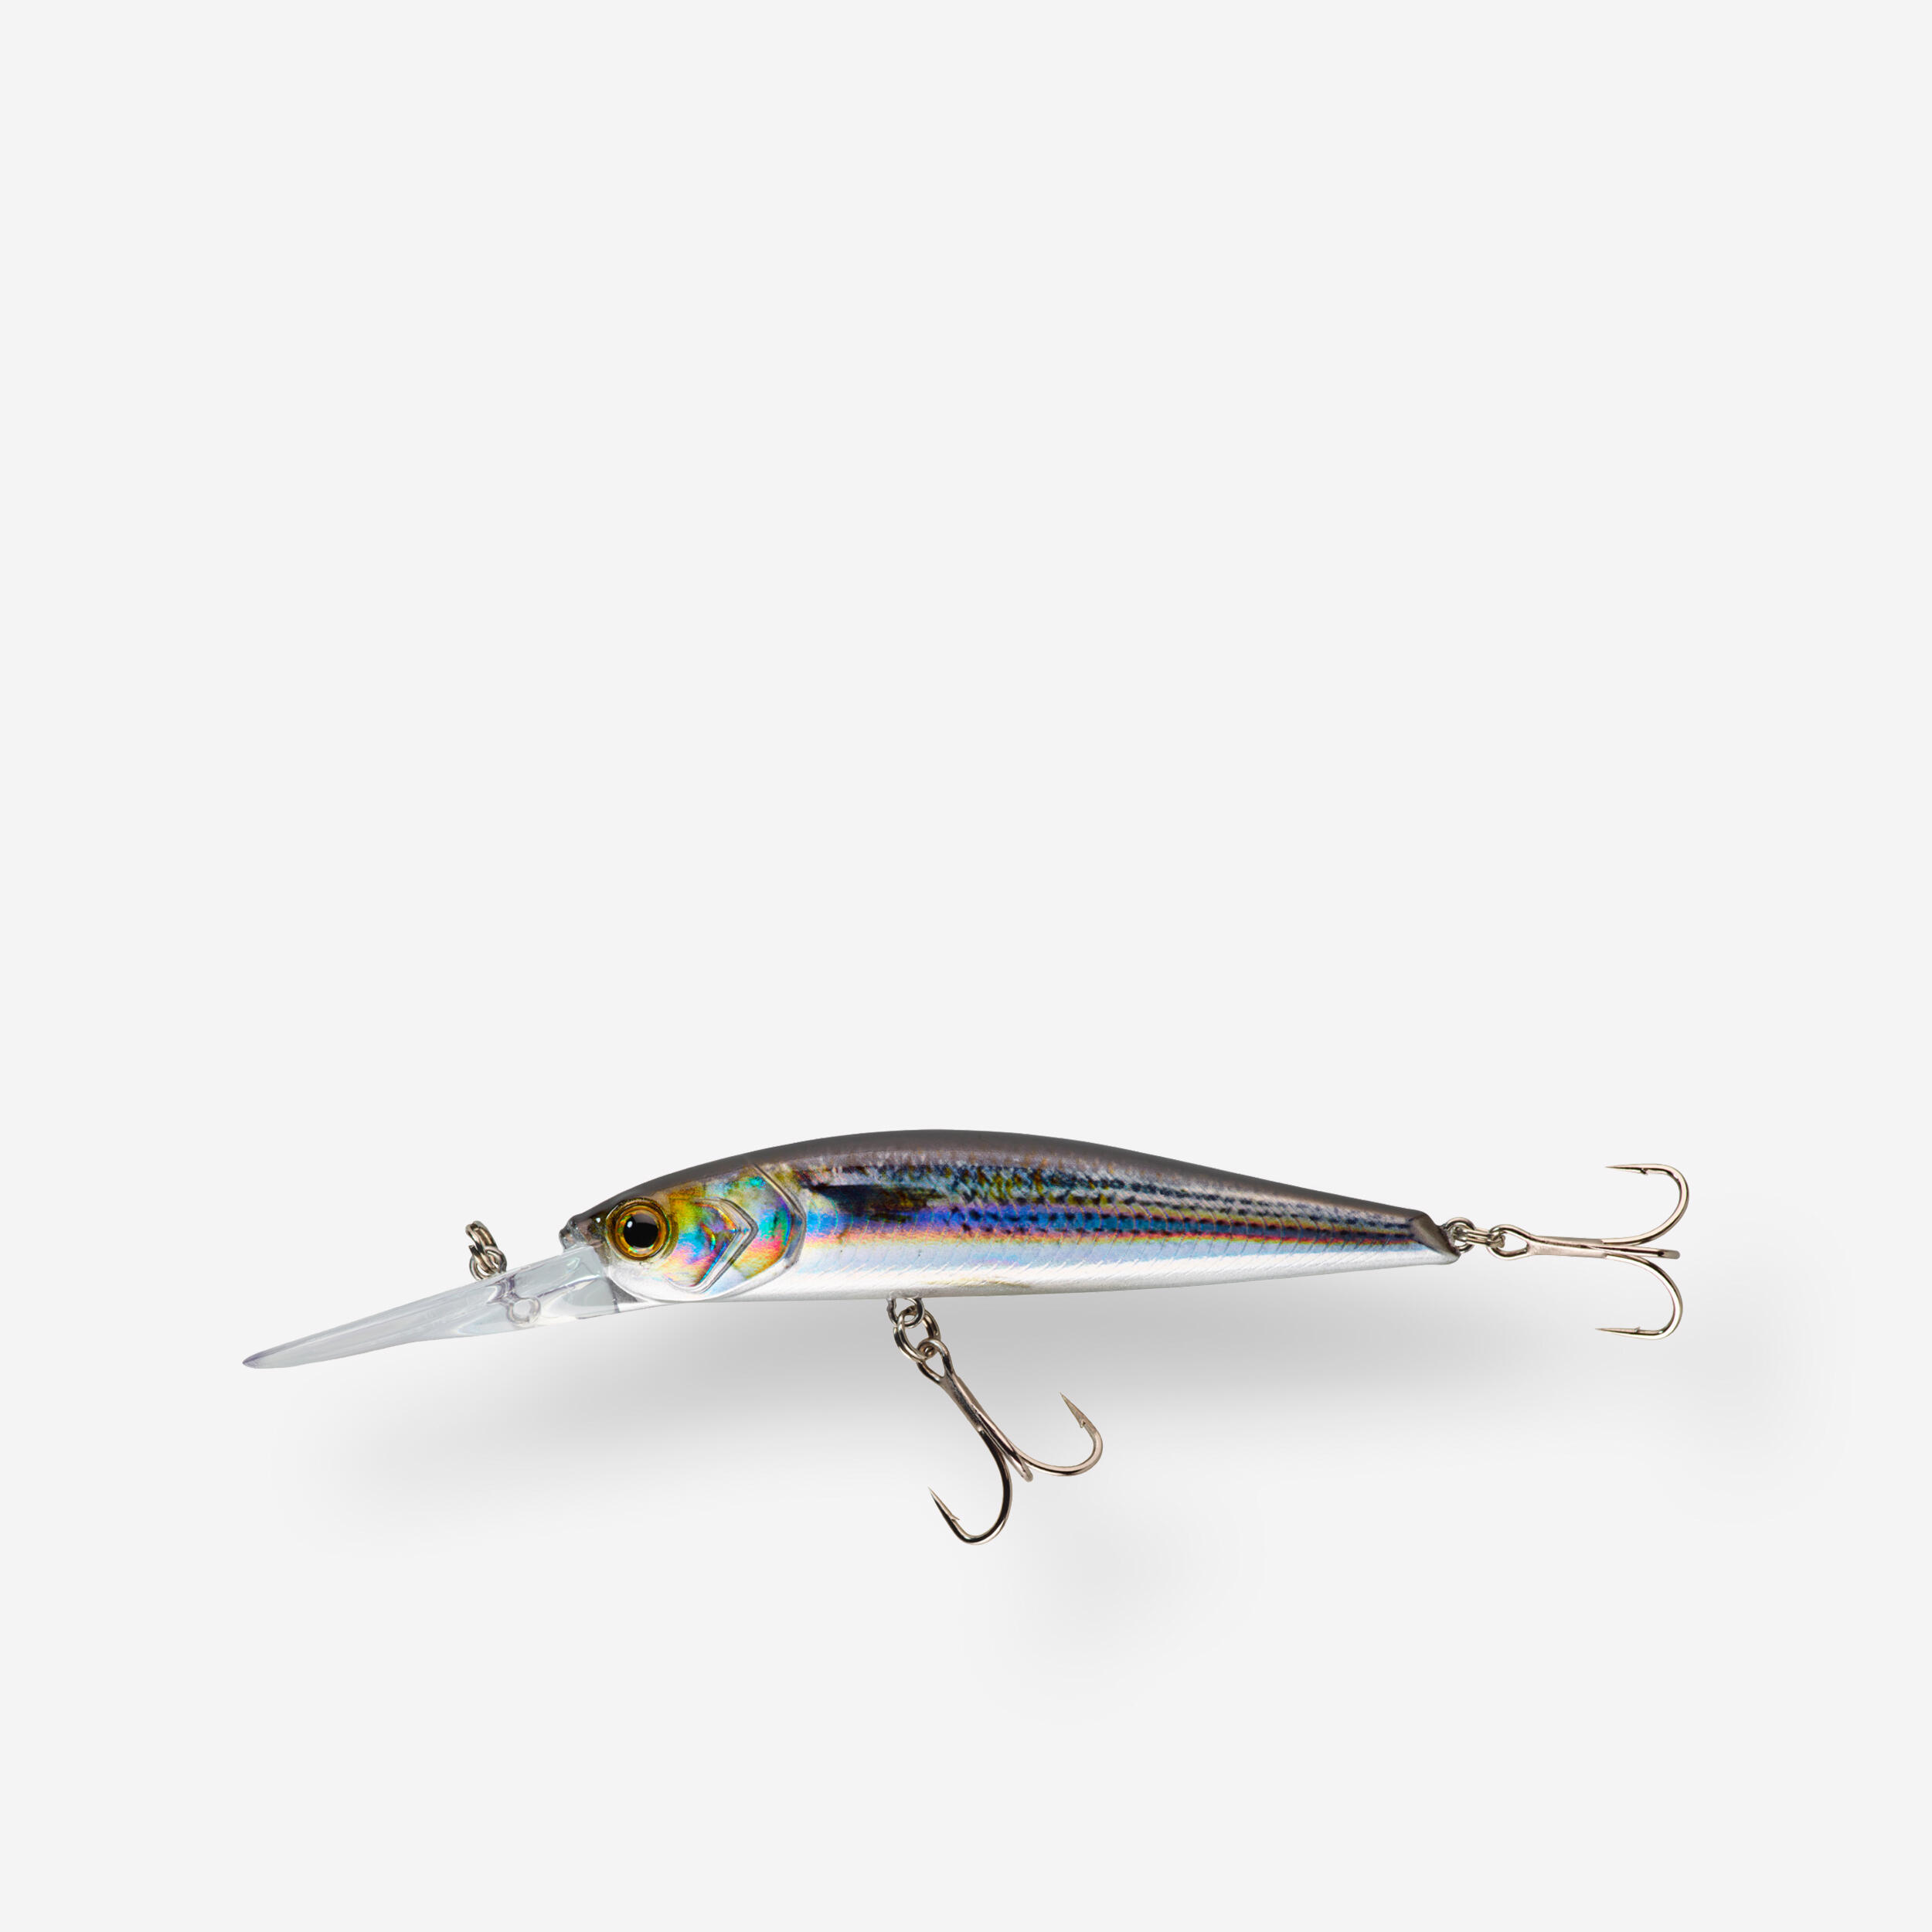 Deep diving lures